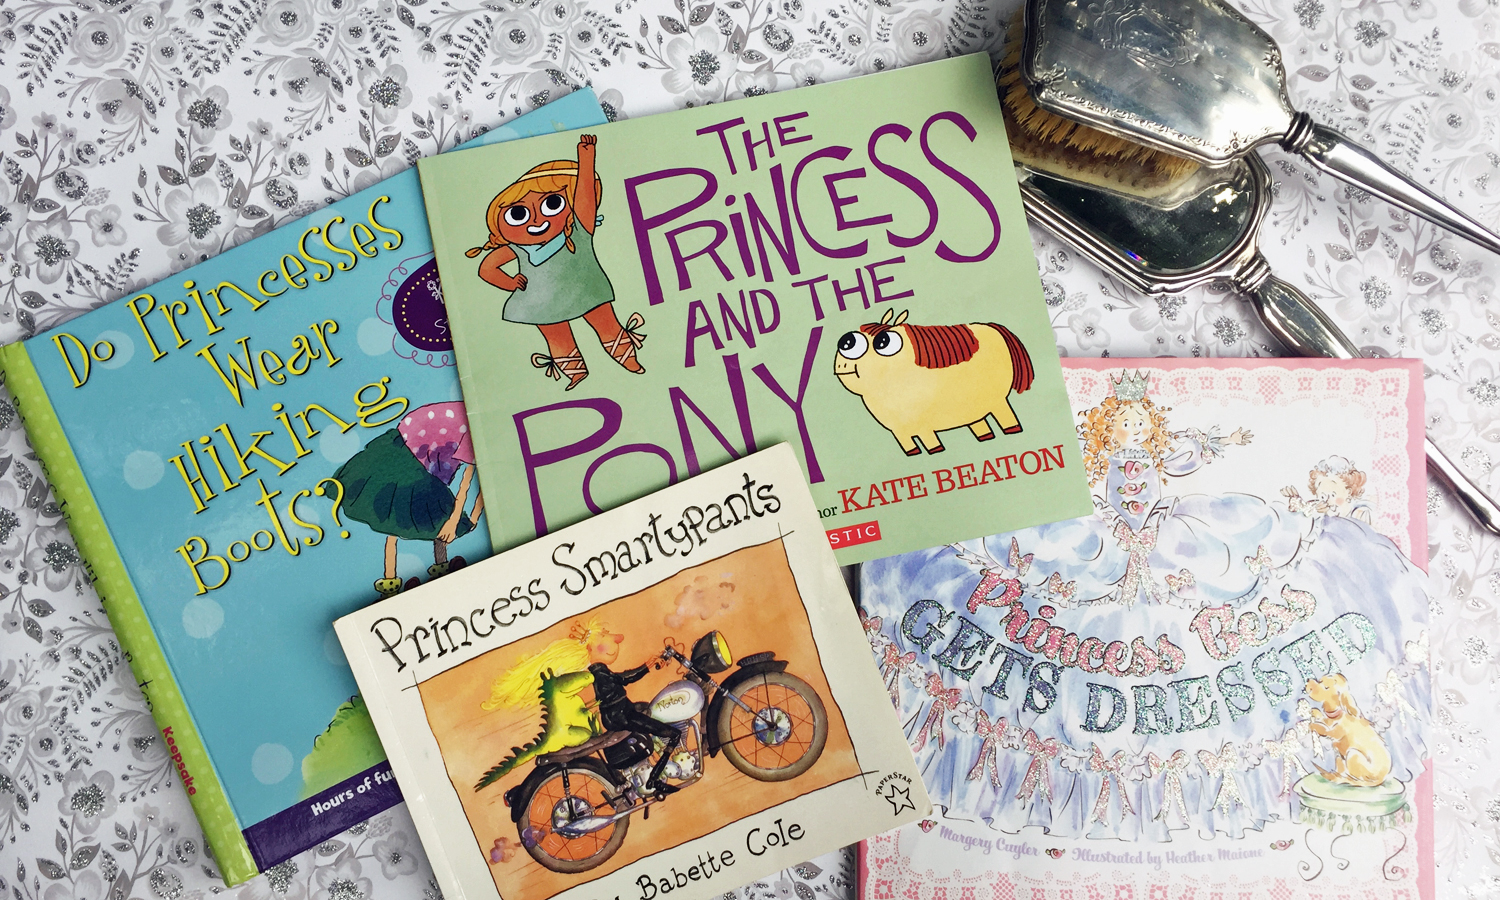 11 books about extraordinary princesses. These books encourage children to be unique.